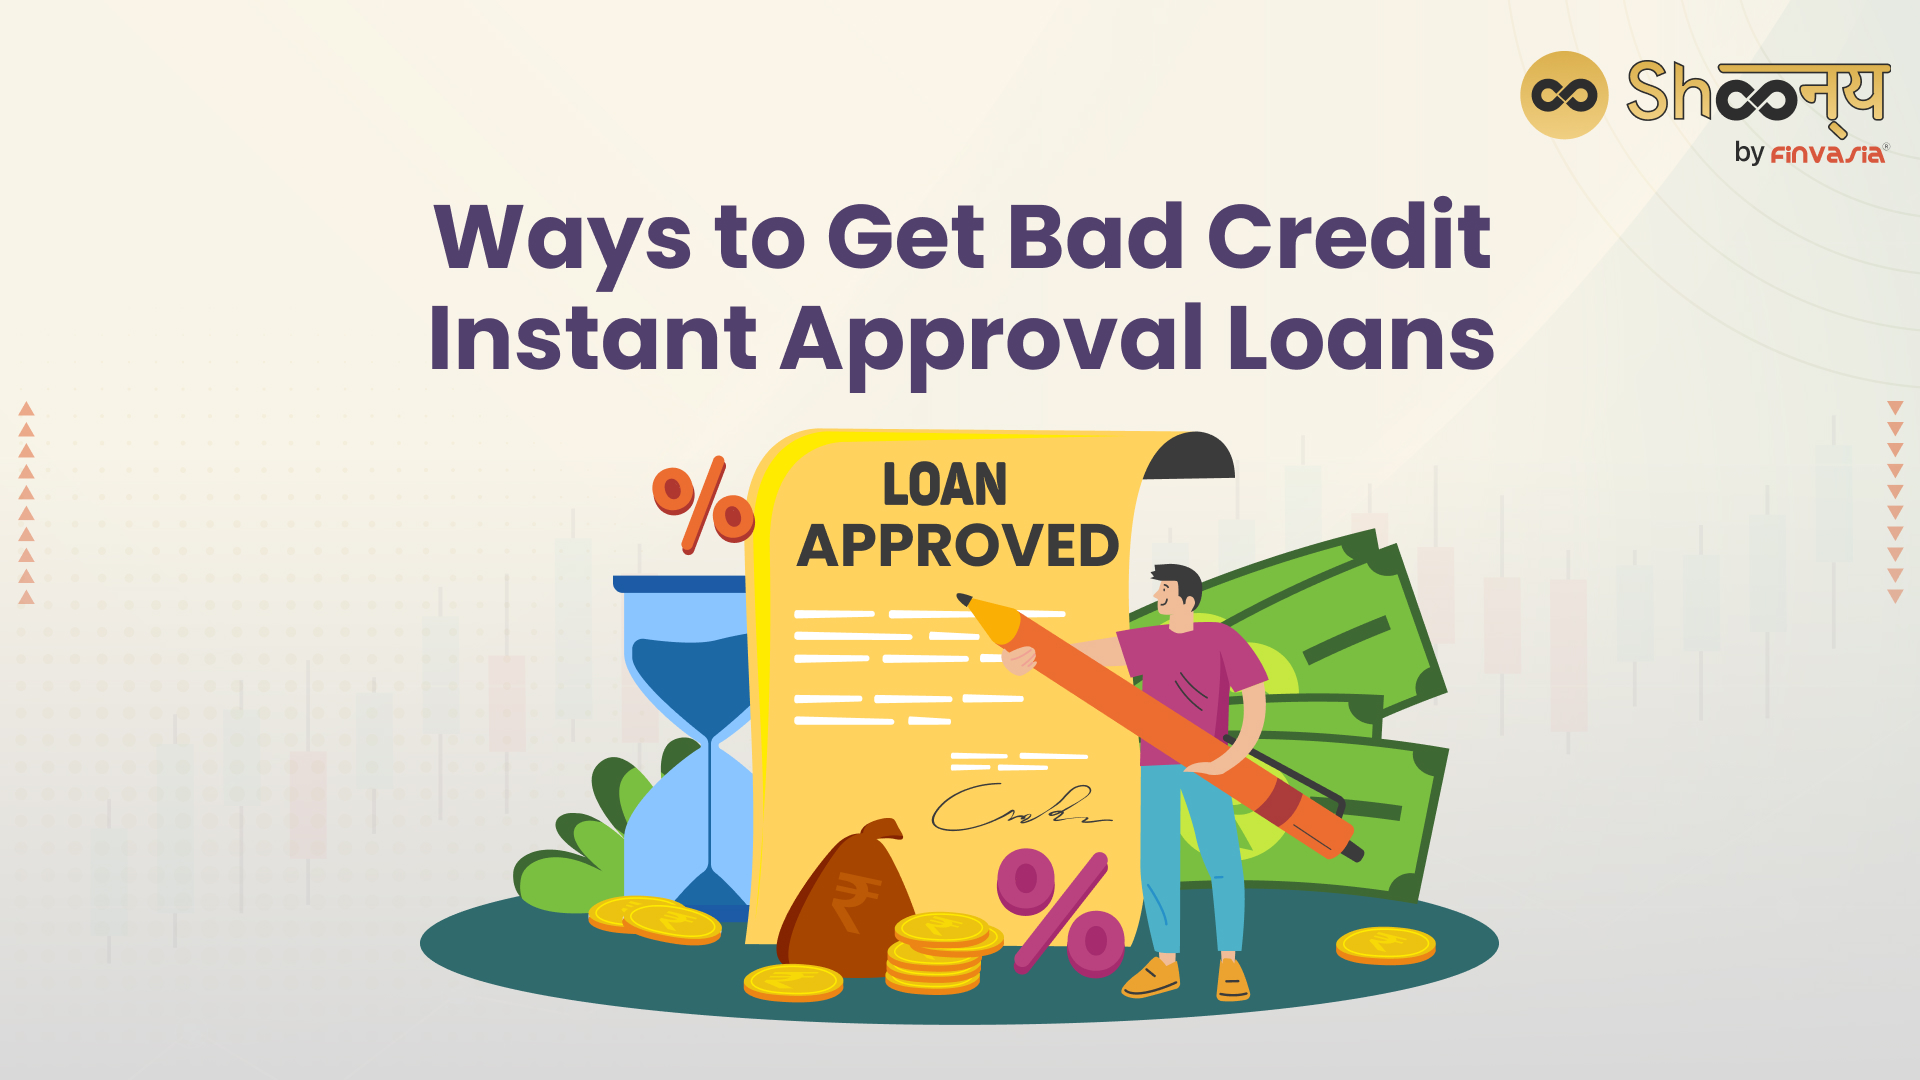 Ways to Get Bad Credit Instant Approval Loans